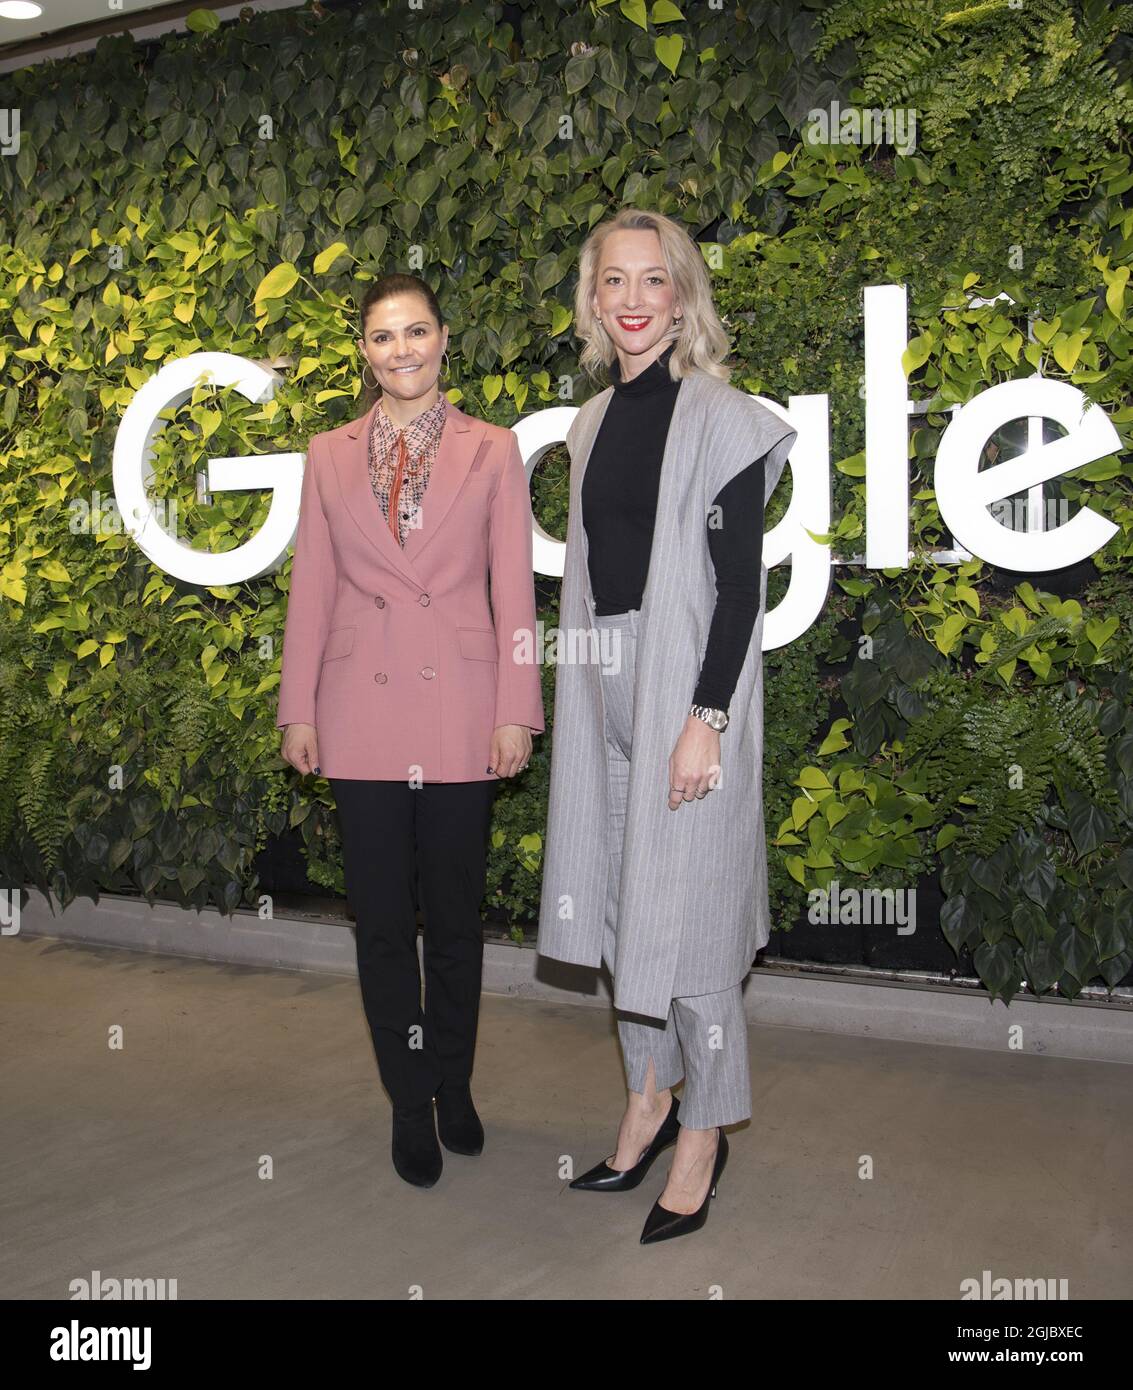 Crown Princess Victoria and the CEO of Google Sweden during Victoria's  visit to THE Google office in Stockholm, Sweden on Thursday, March 7, 2019  Foto: Fredrik Sandberg / TT kod 10080 Stock Photo - Alamy